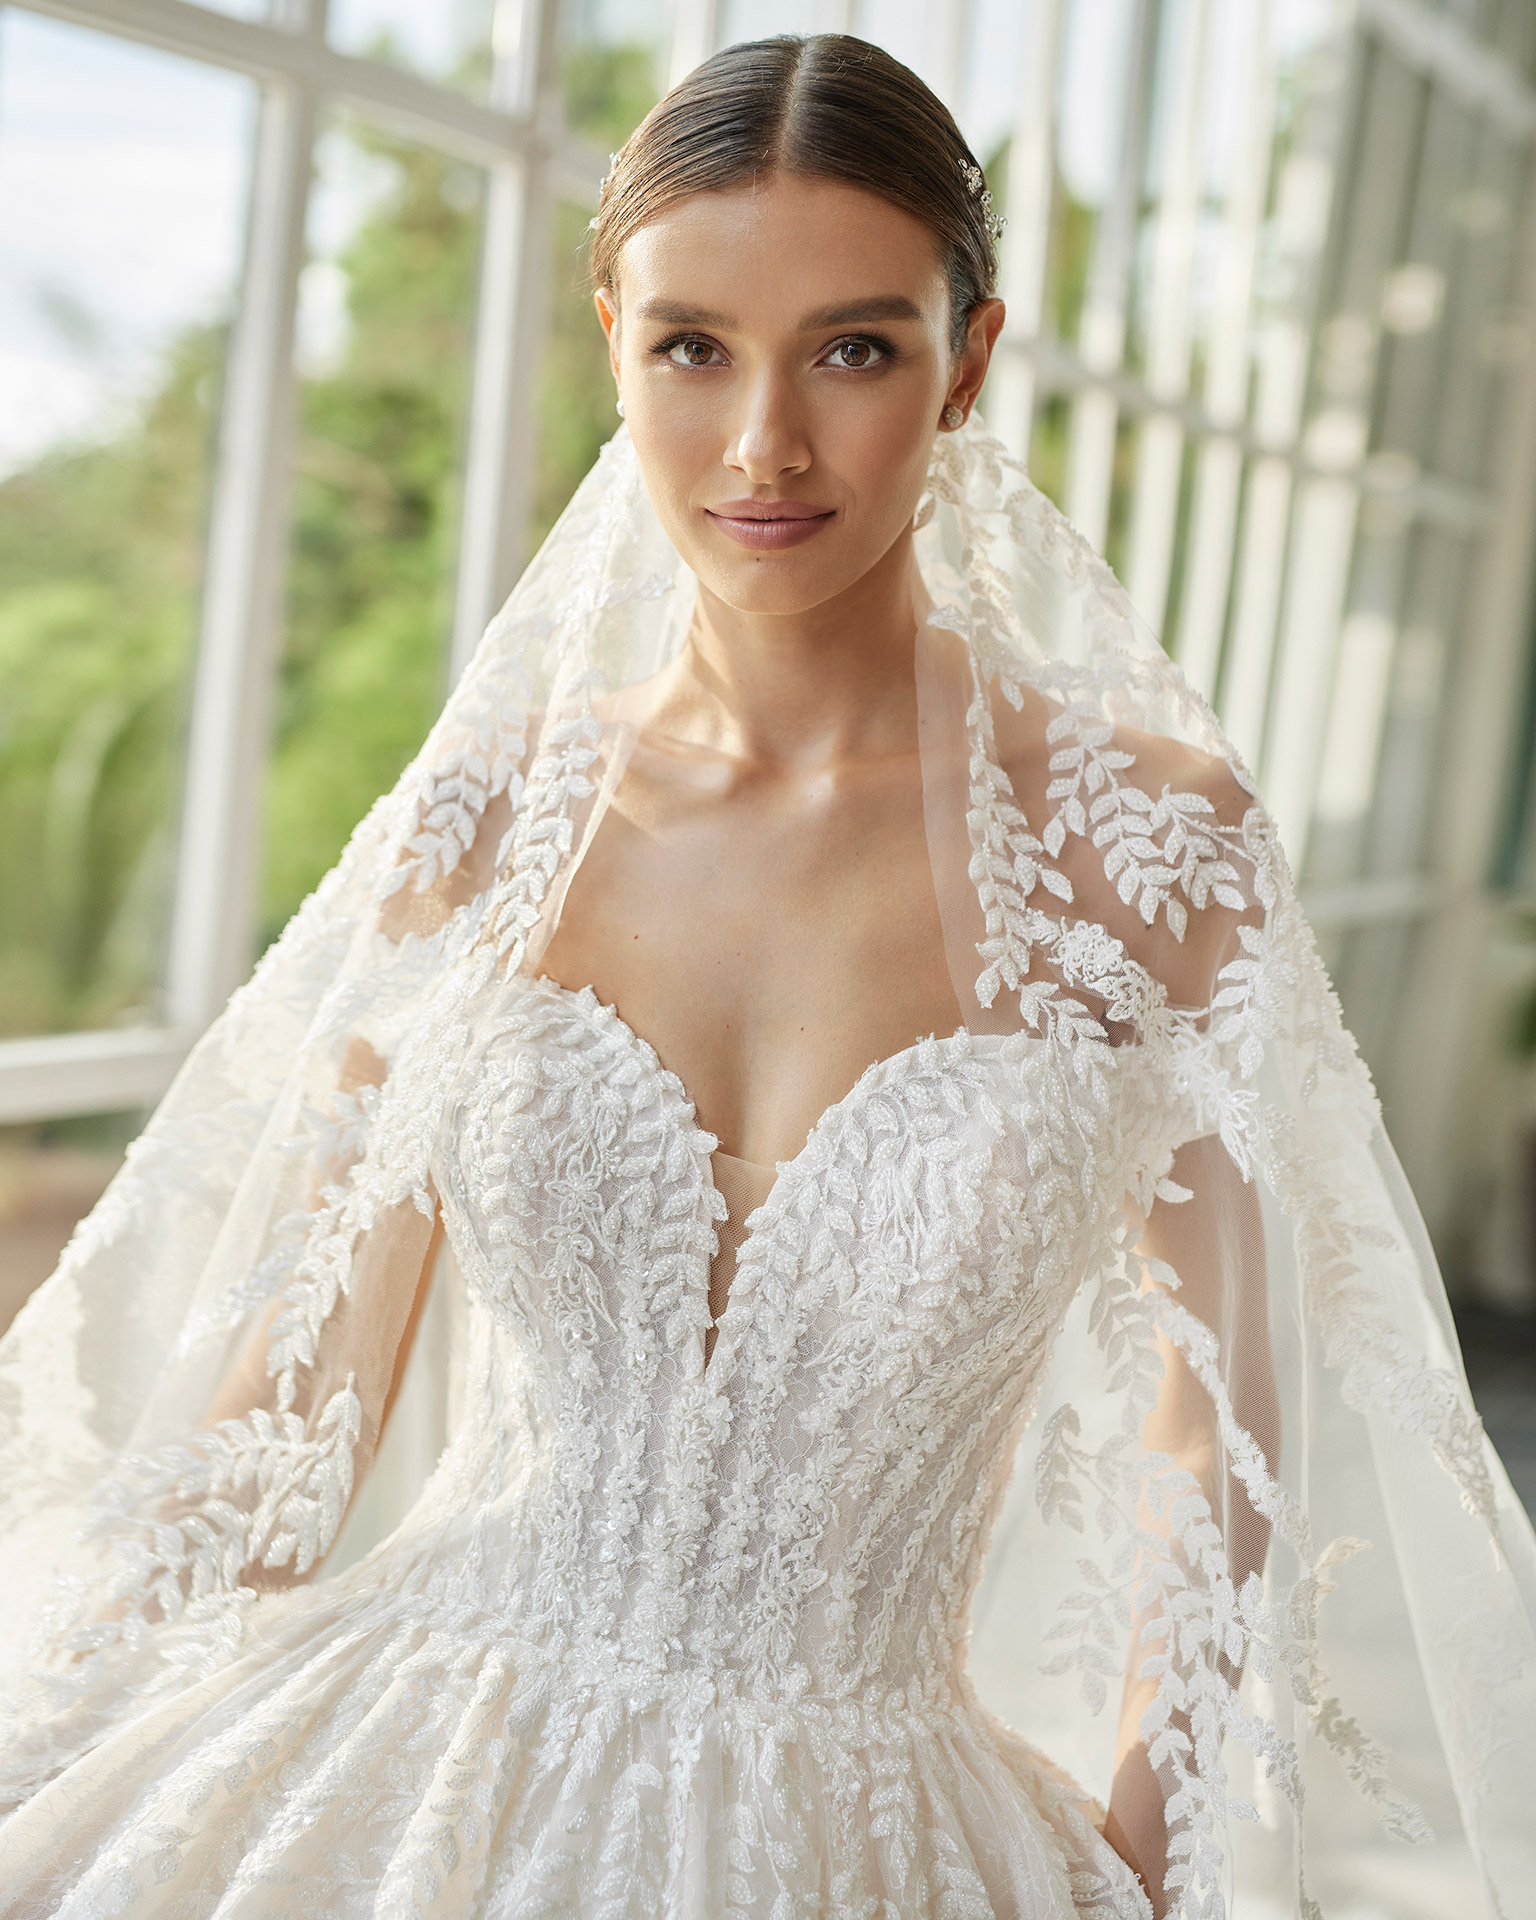 Princess-style wedding dress, with a beadwork embellished bodice; with a sweetheart neckline, a corset back, and dropped sleeves. Unique Luna Studio outfit made of tulle embellished with beadwork lace. LUNA_NOVIAS.